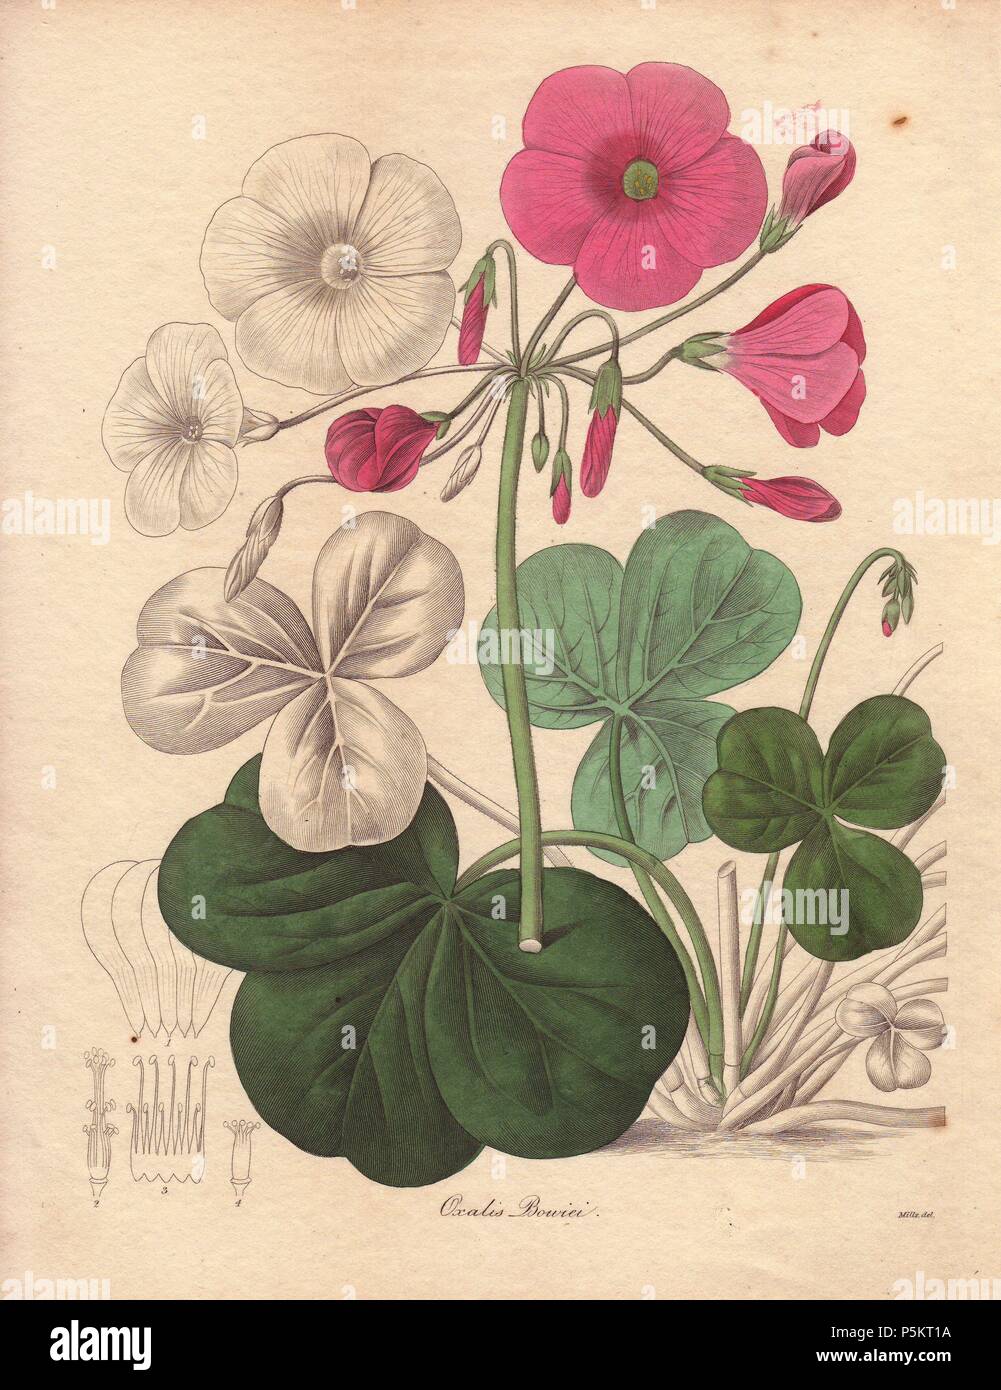 Oxalis bowiei. . Bowie's wood-sorrel or Cape shamrock is a small pink-flowered plant native to South Africa. . Miss R. Mills (active 18361842) was also the main illustrator for Knowles and Westcott’s The Floral Cabinet (1837-1842). . Benjamin Maund's The Botanist was a five-volume series that introduced 250 new plants from 1836 to 1842. The series is notable for its many female artists: the plates were drawn by Maund's daughters Sarah and Eliza, Augusta Withers, Priscilla Bury, Jane Taylor, Miss R. Mills among others. The other characteristic is partial colouring - many of the finely detailed Stock Photo